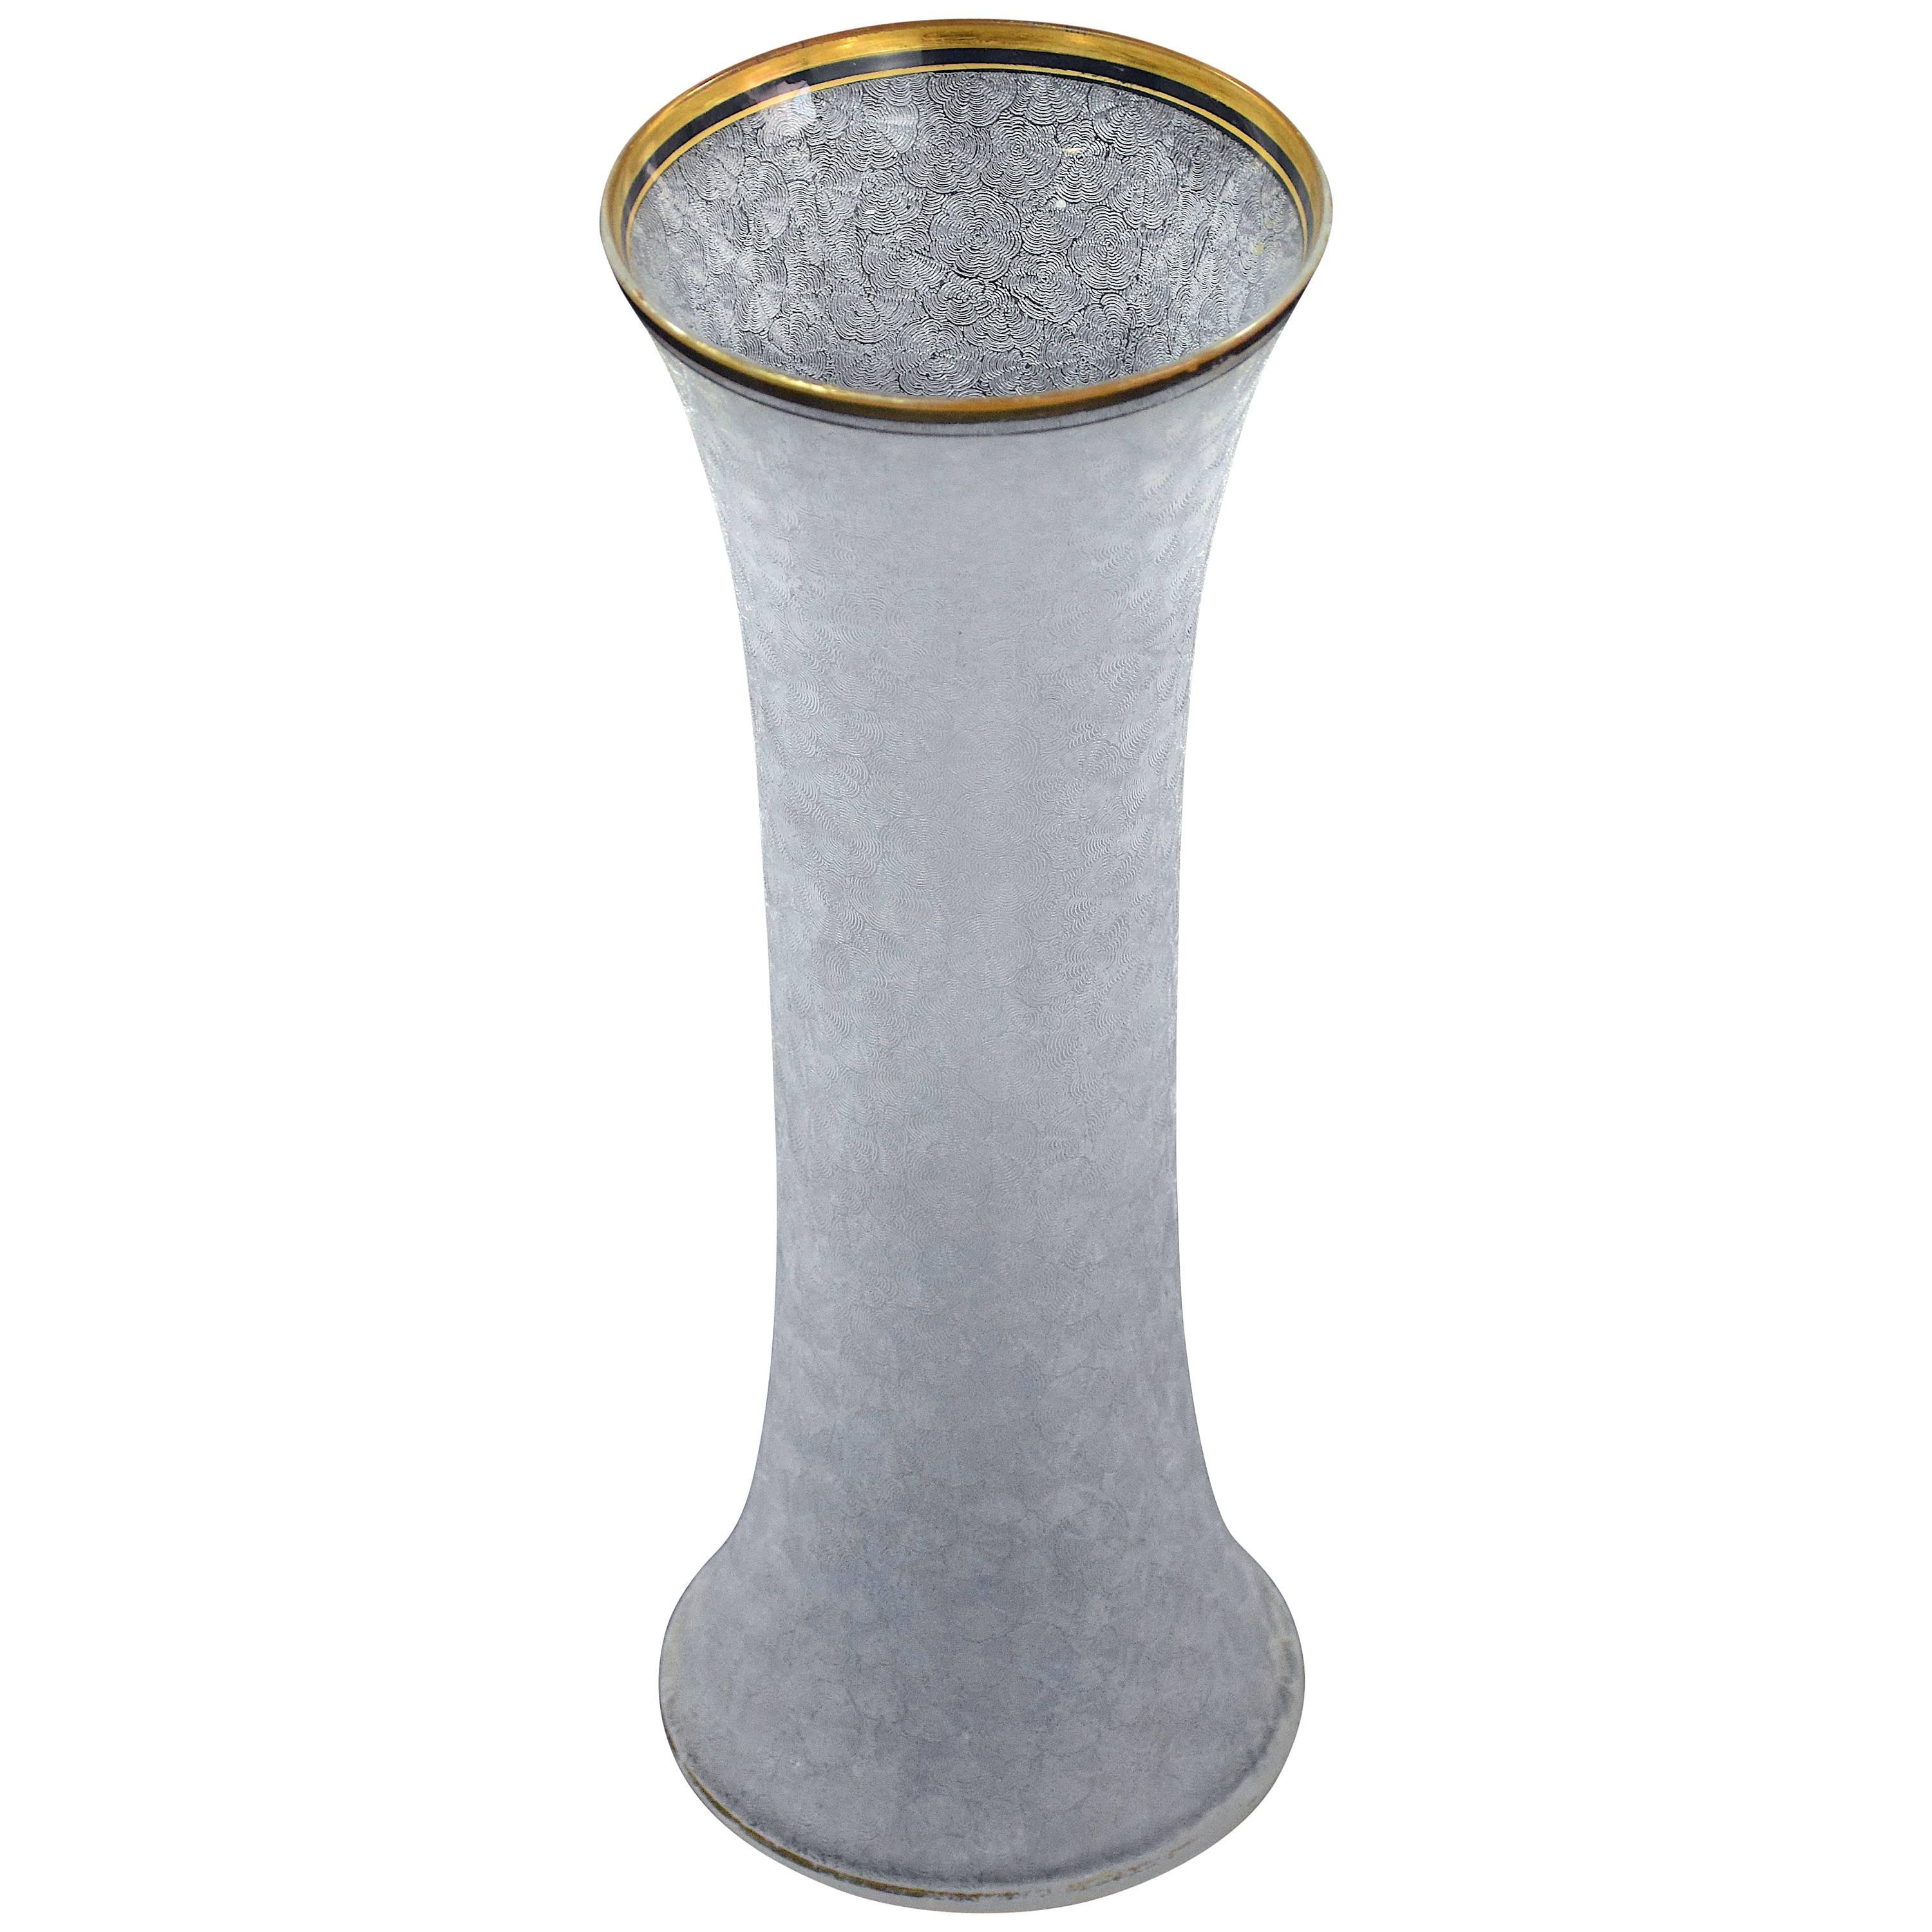 20th century French vintage glass vase composed of intricate glass etchings allover and a delicate gold trim,
France, circa 1960s.

-----------------------
Spirit Gallery presents a harmonious mix of iconic and engaging 20th century pieces and